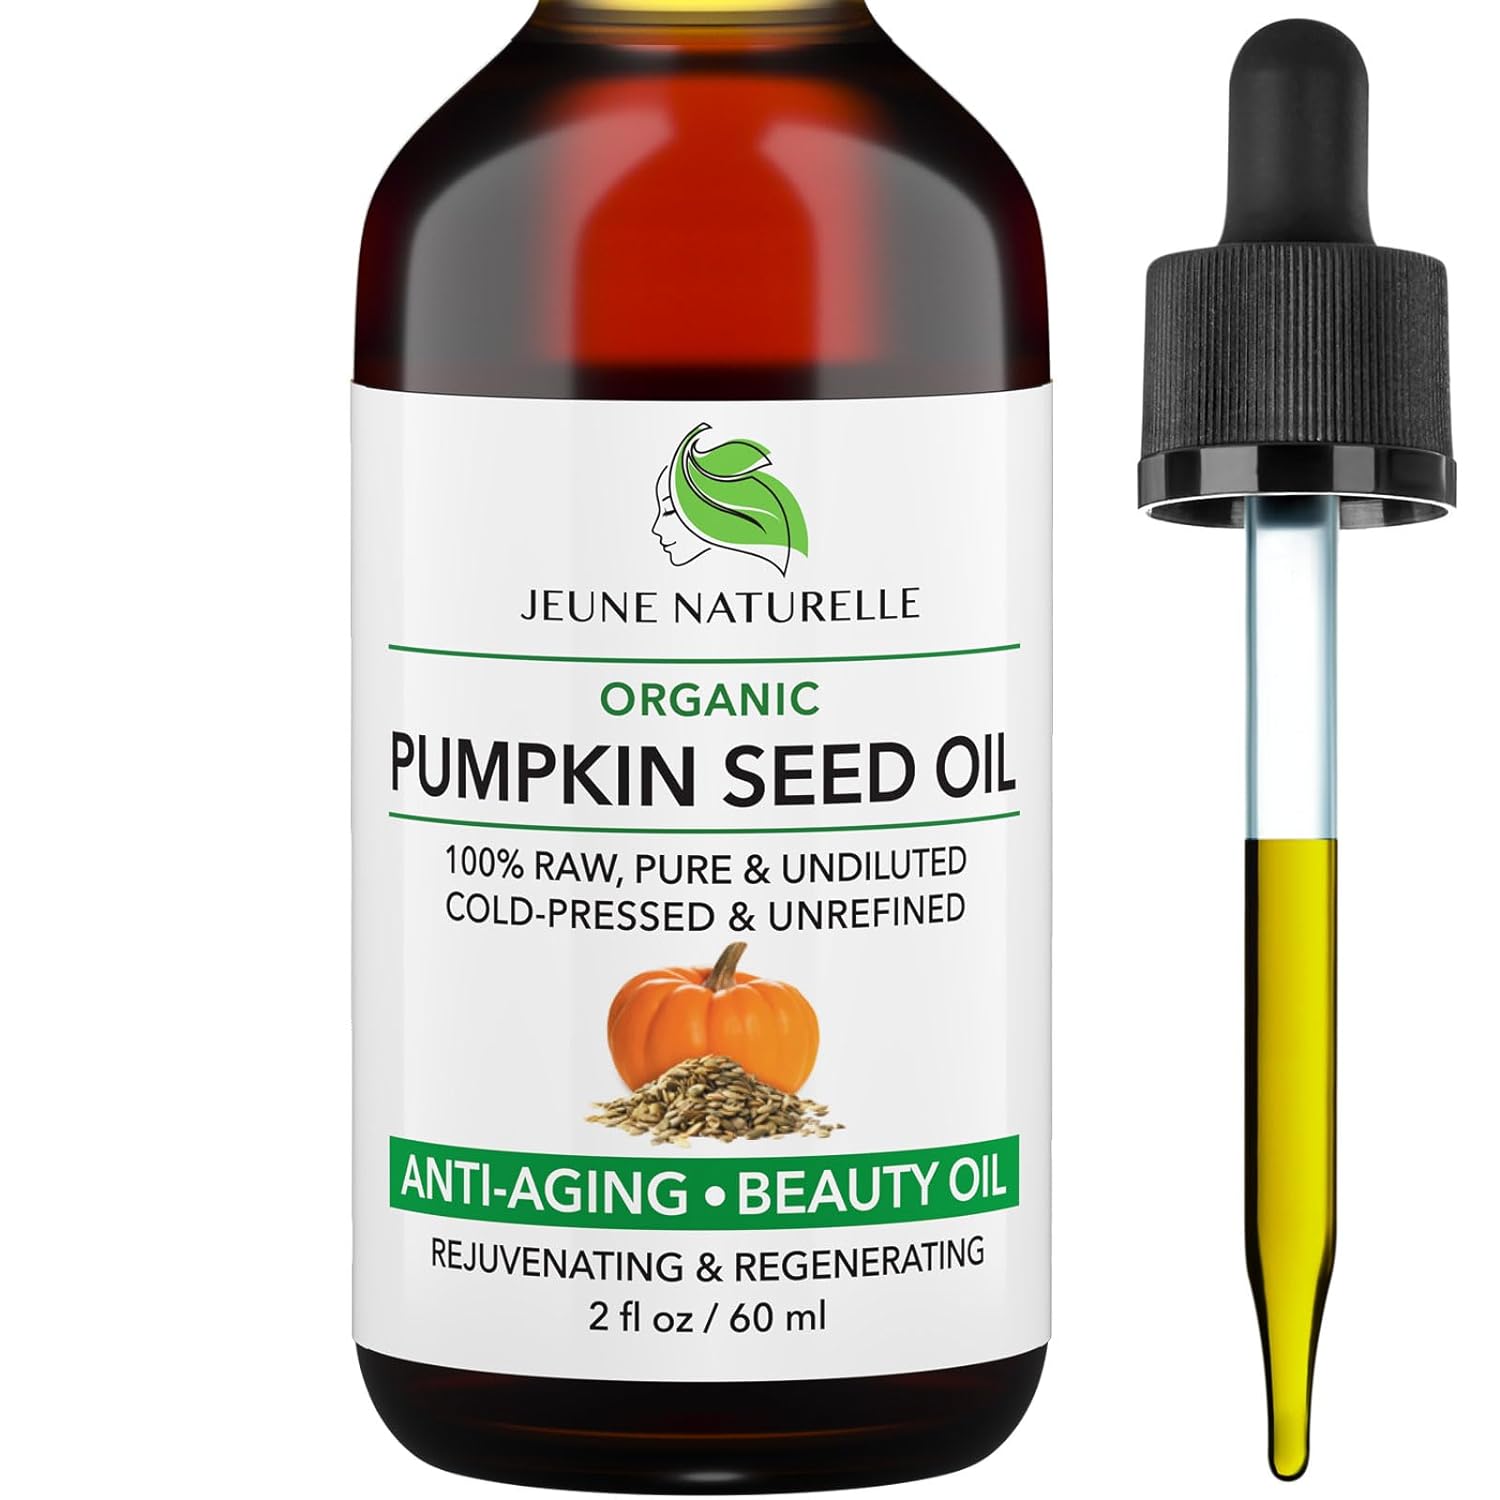 Jeune Naturelle Pumpkin Seed Oil Organic, 100% Pure RAW Cold Pressed Undiluted For Anti Aging Wrinkle Repair Hair Growth, Fast Absorbing, Travel Size, Non-Comedogenic Organic Pumpkin Seed Oil